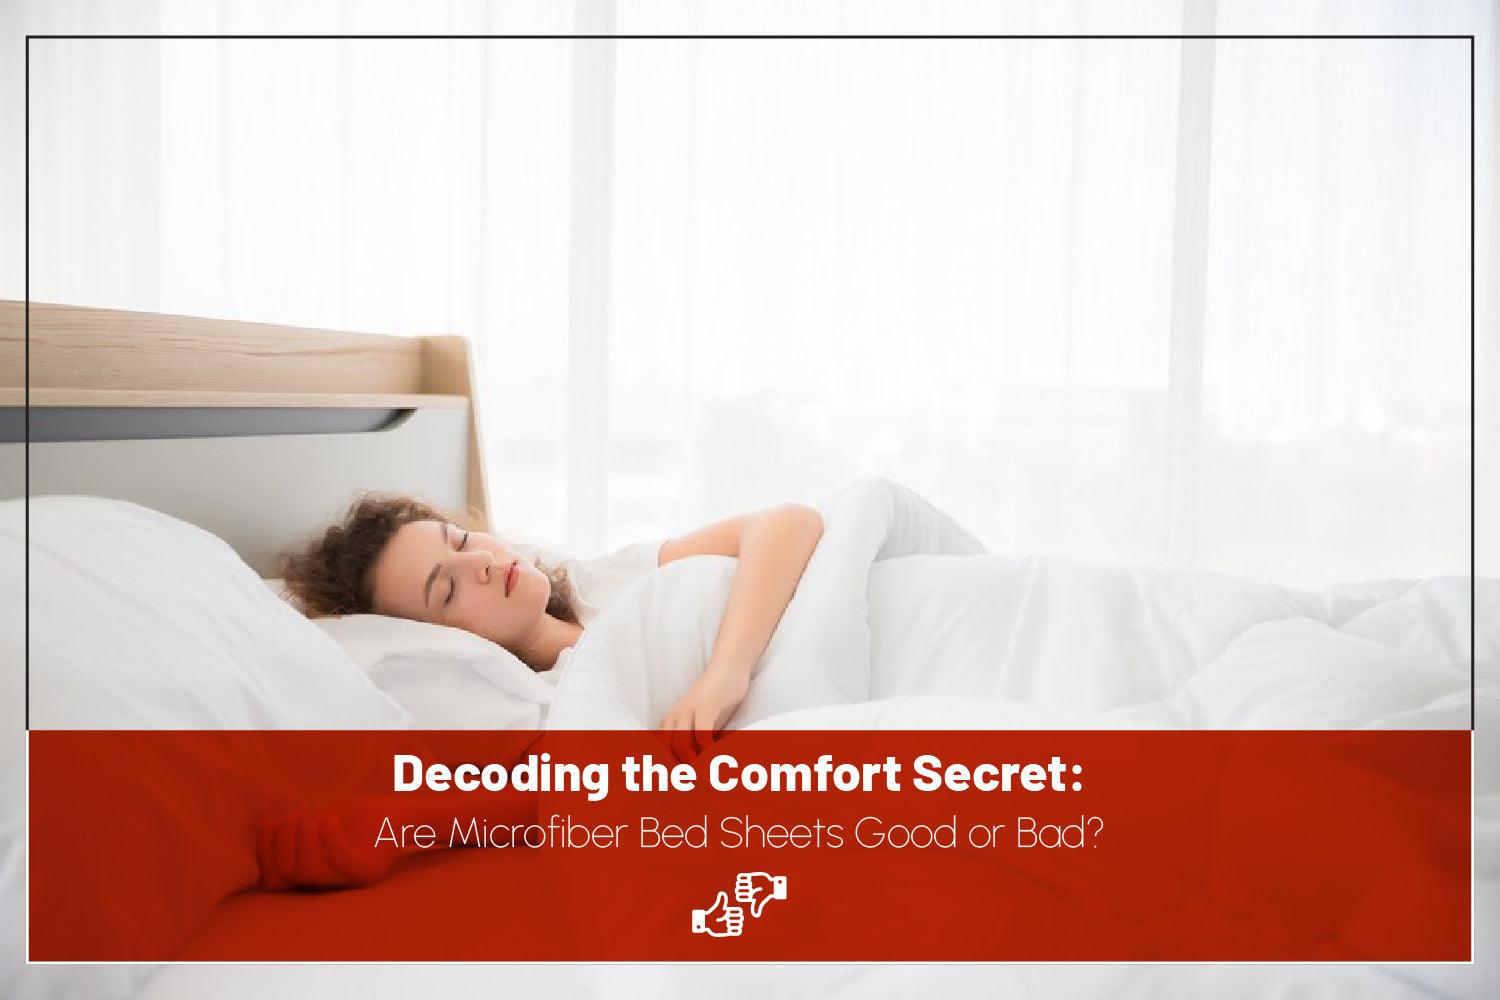 Decoding the Comfort Secret: Are Microfiber Bed Sheets Good or Bad